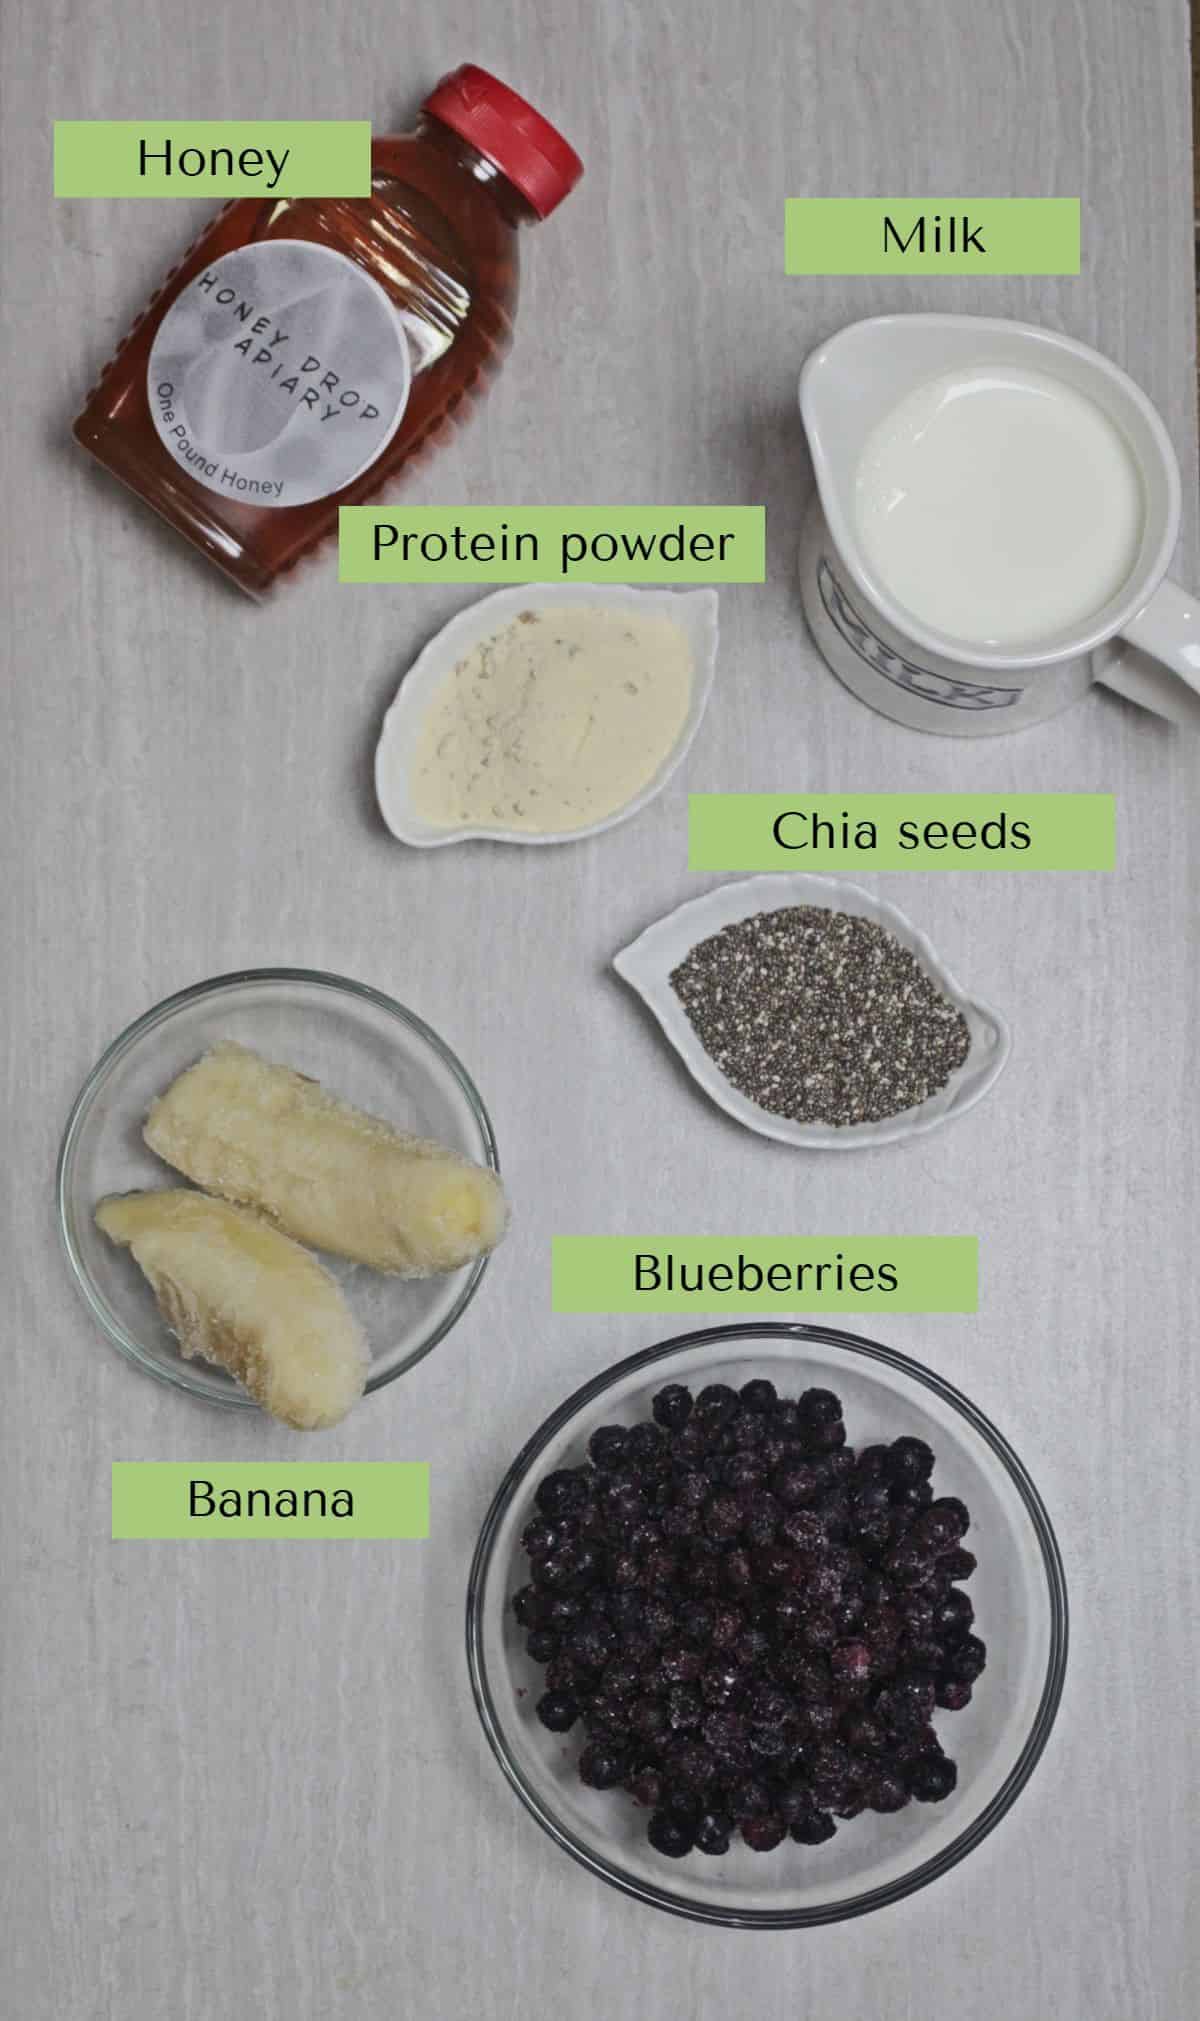 Ingredients needed to make banana blueberry smoothie.